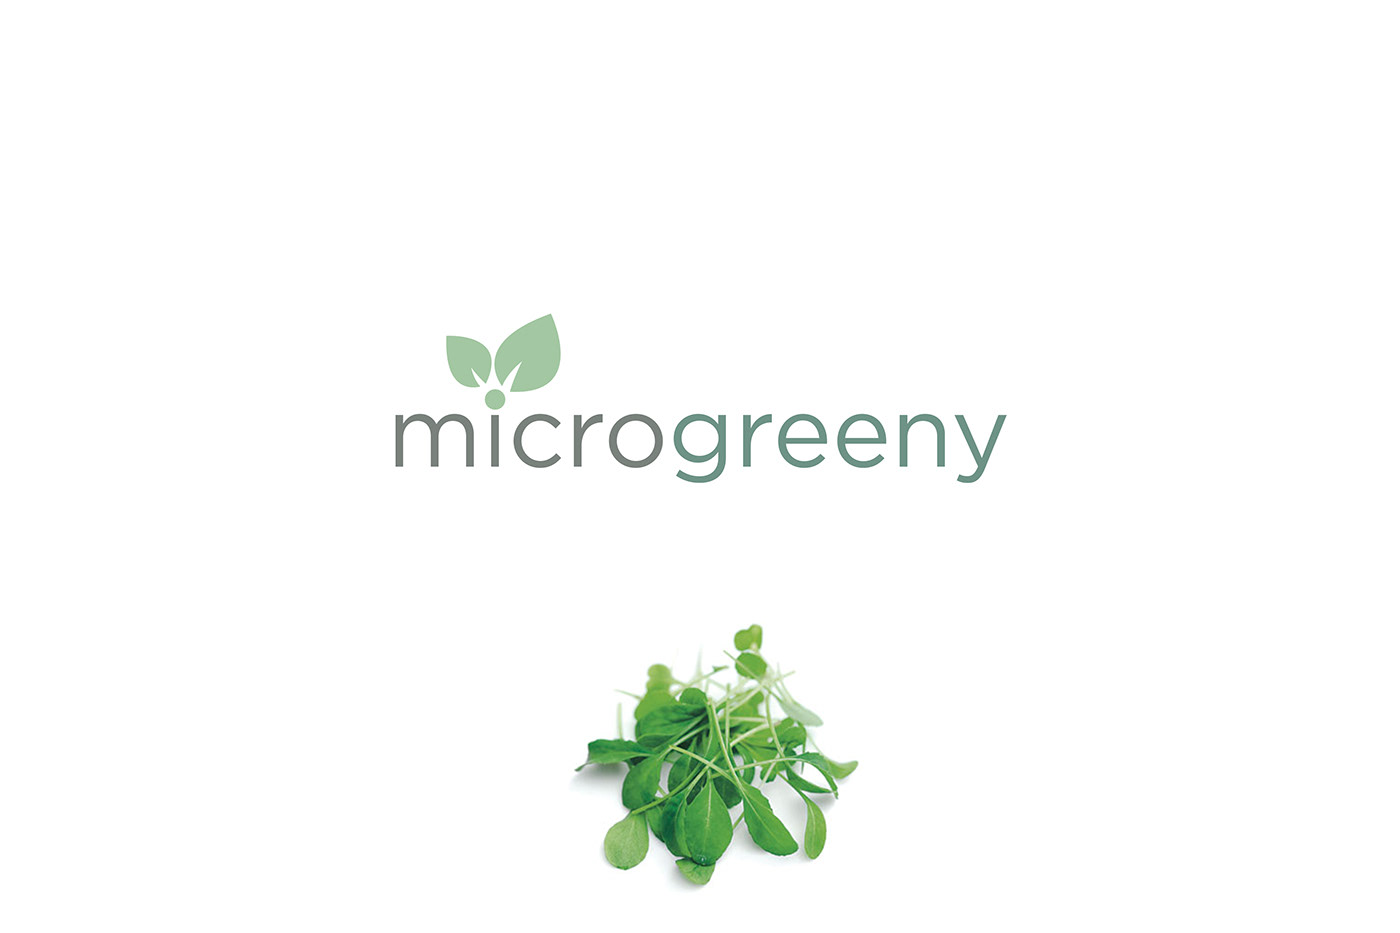 branding  Greens grow healthy micro natural Nature salads seeds sprouts